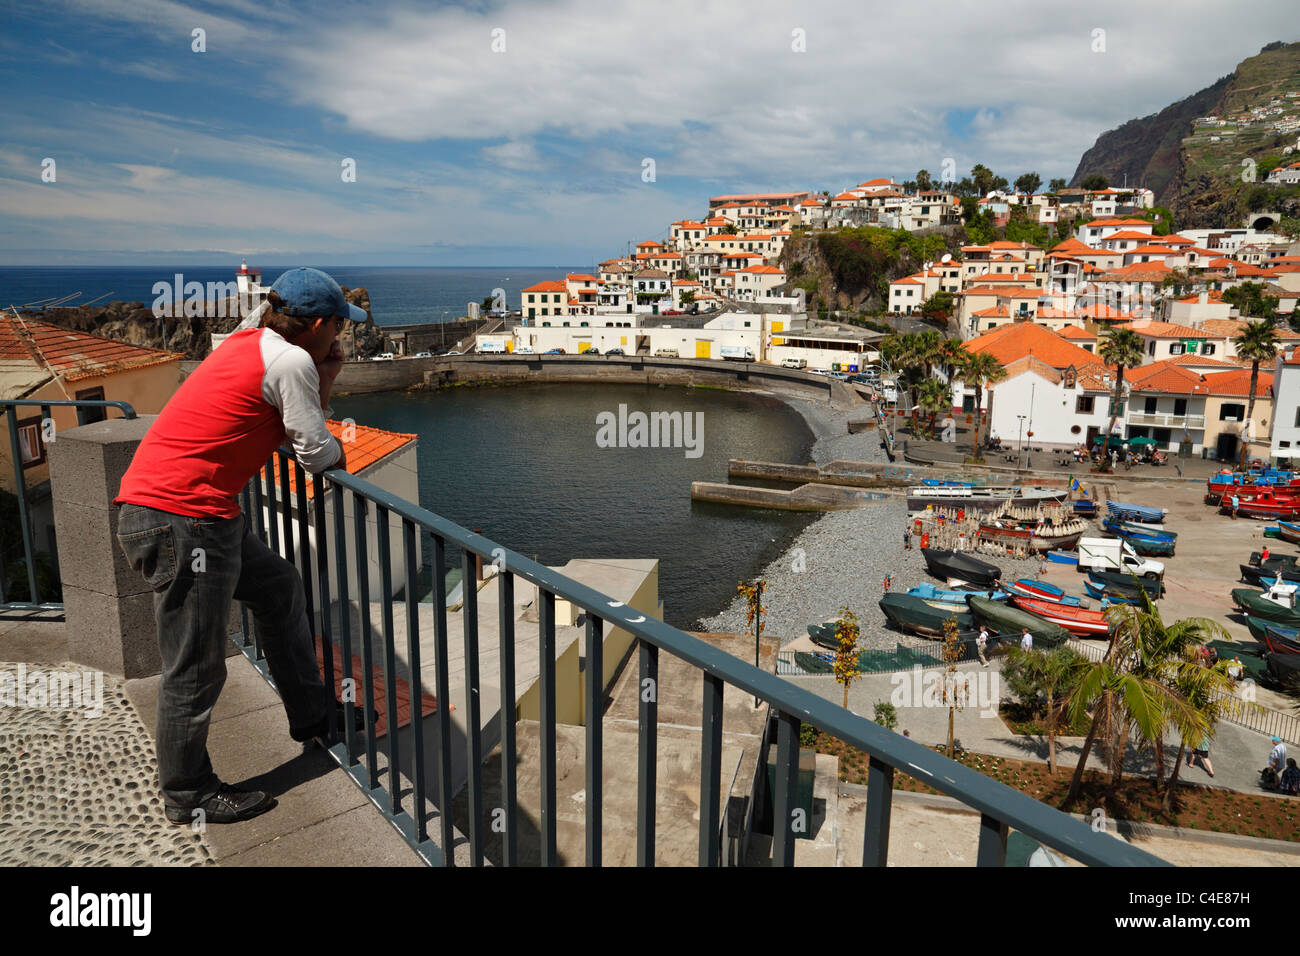 The fishing village of Camara de Lobos, Madeira. The view from where Winston Churchill used to paint in 1950. Stock Photo